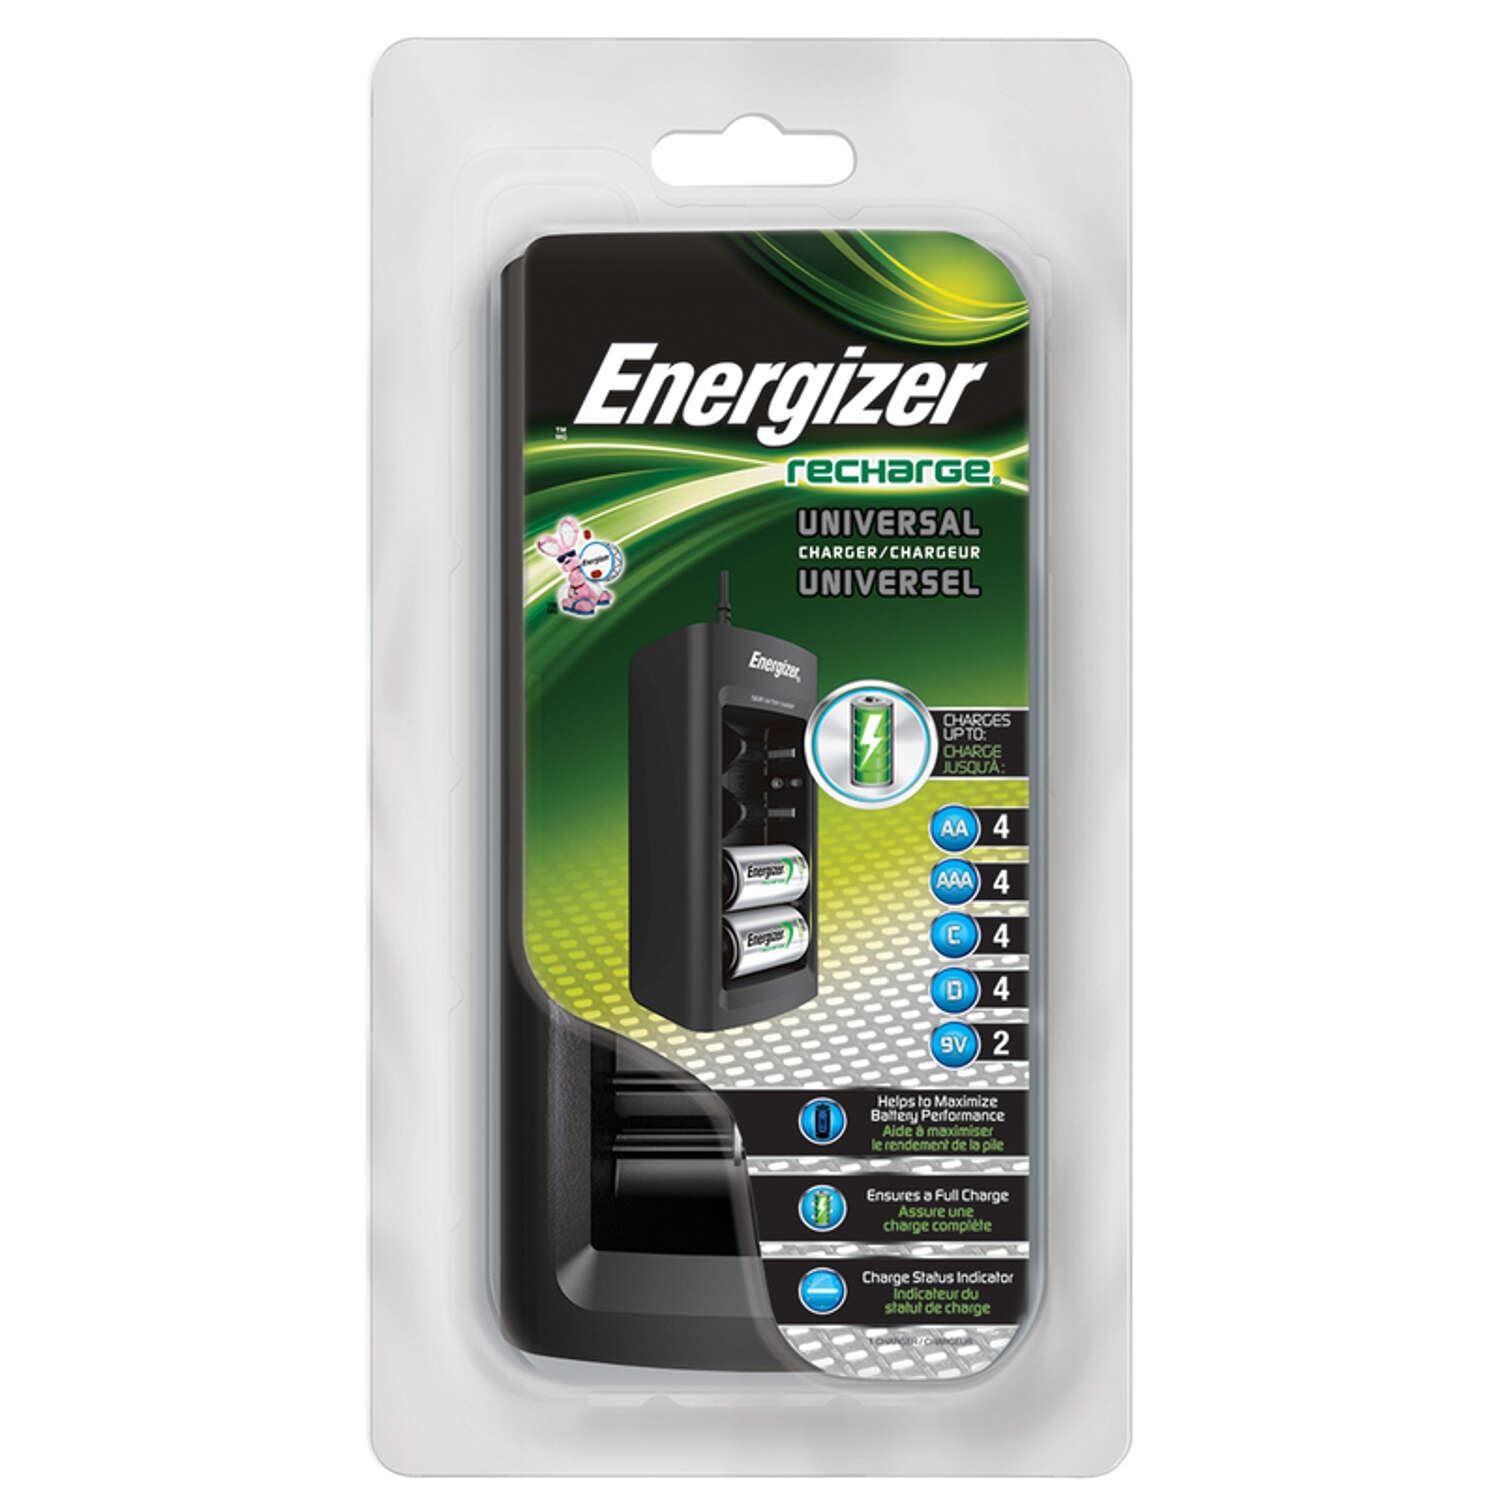 Energizer T43967 12V Universal Battery Charger Green & Silver 